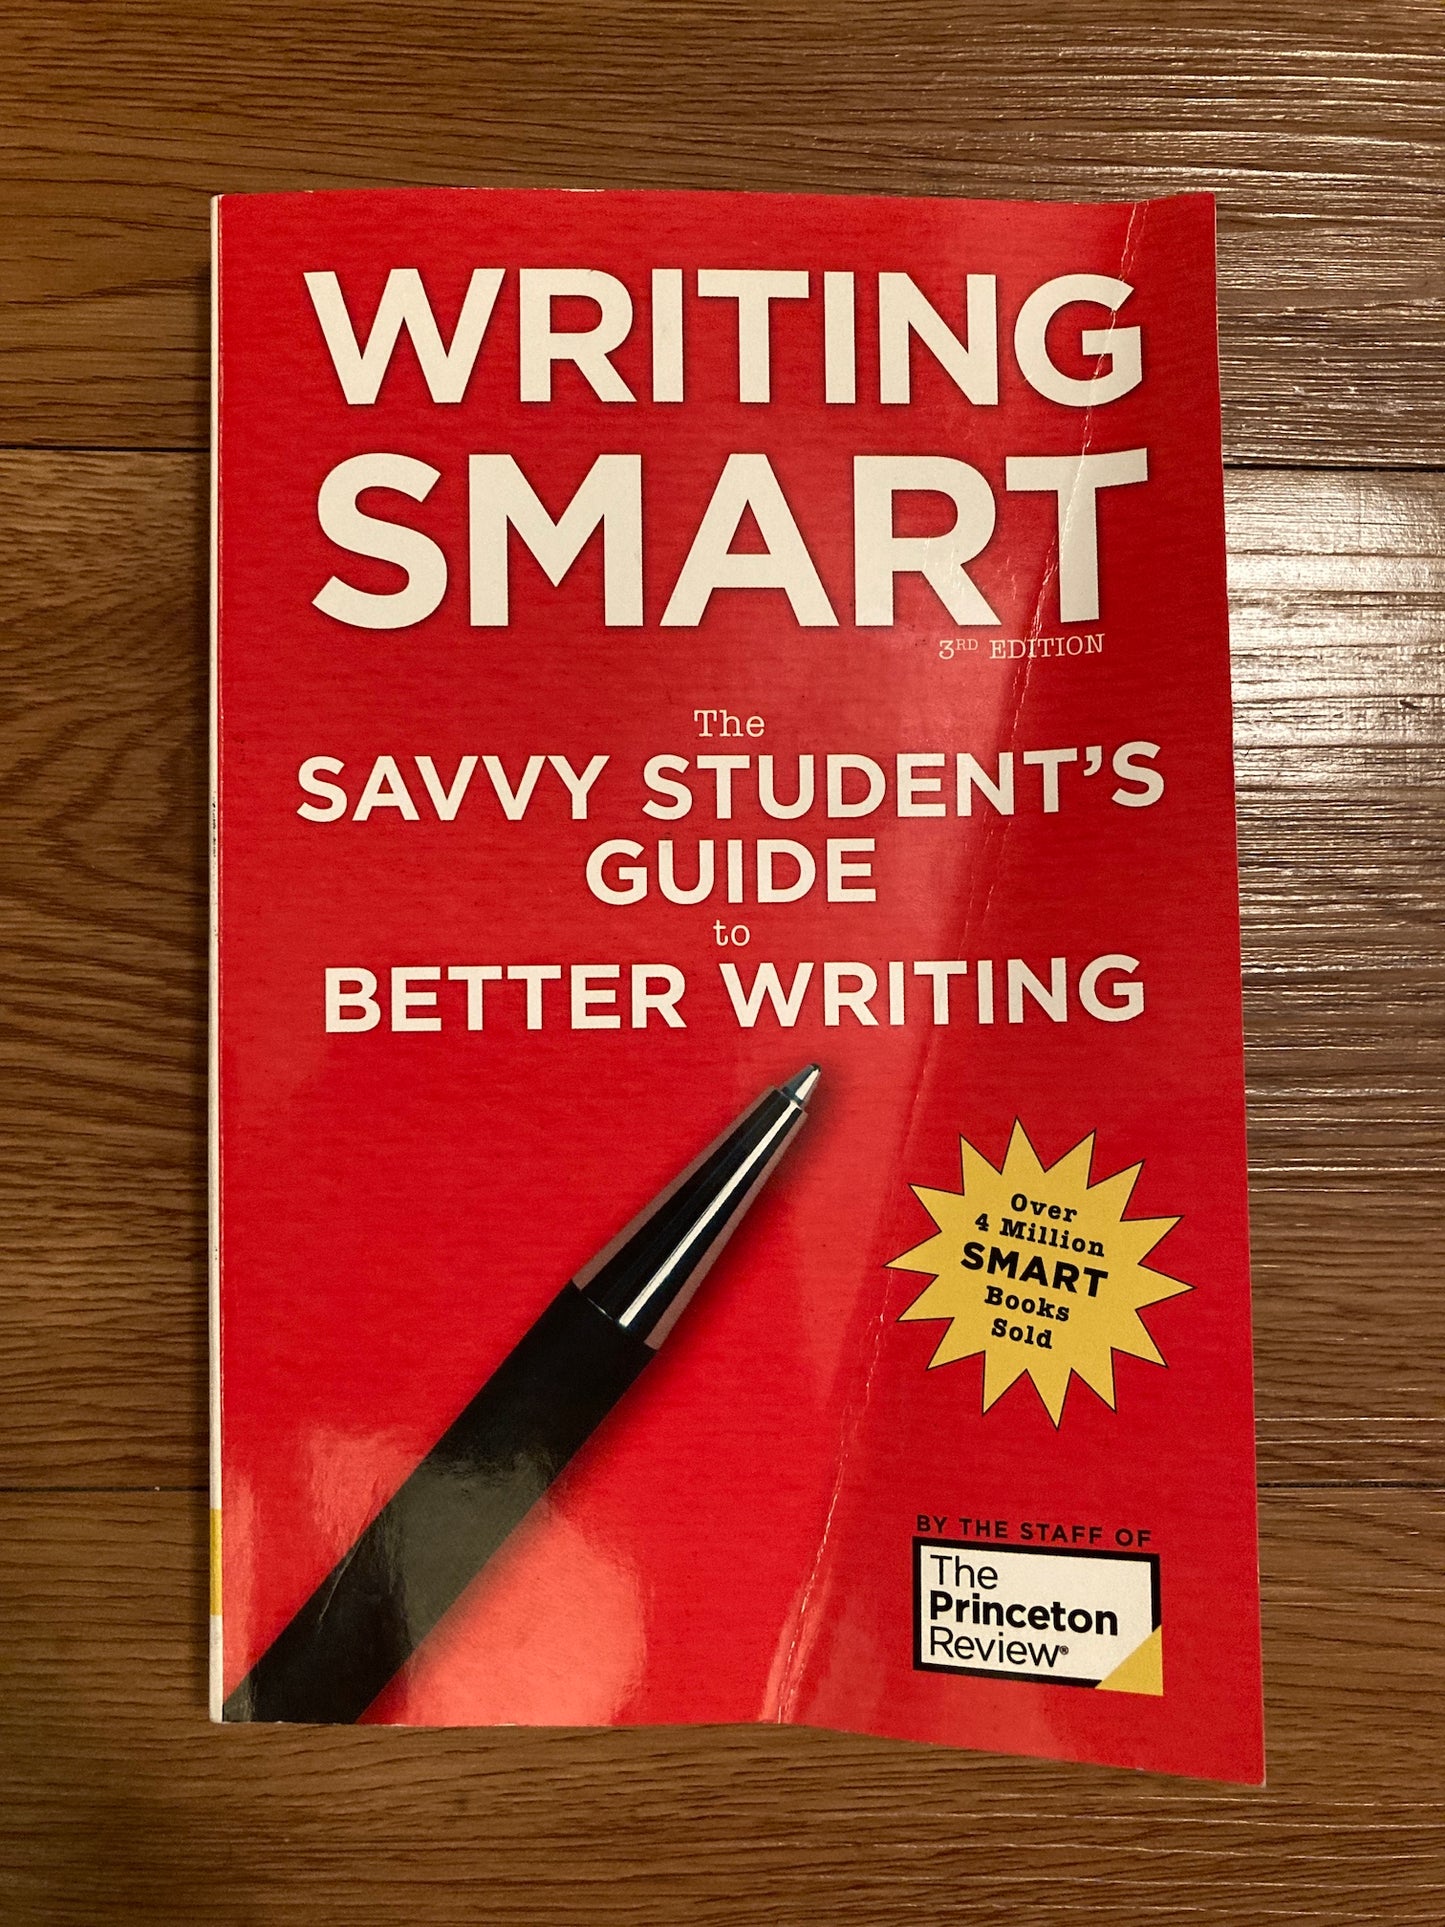 Writing Smart, 3rd Edition: The Savvy Student's Guide